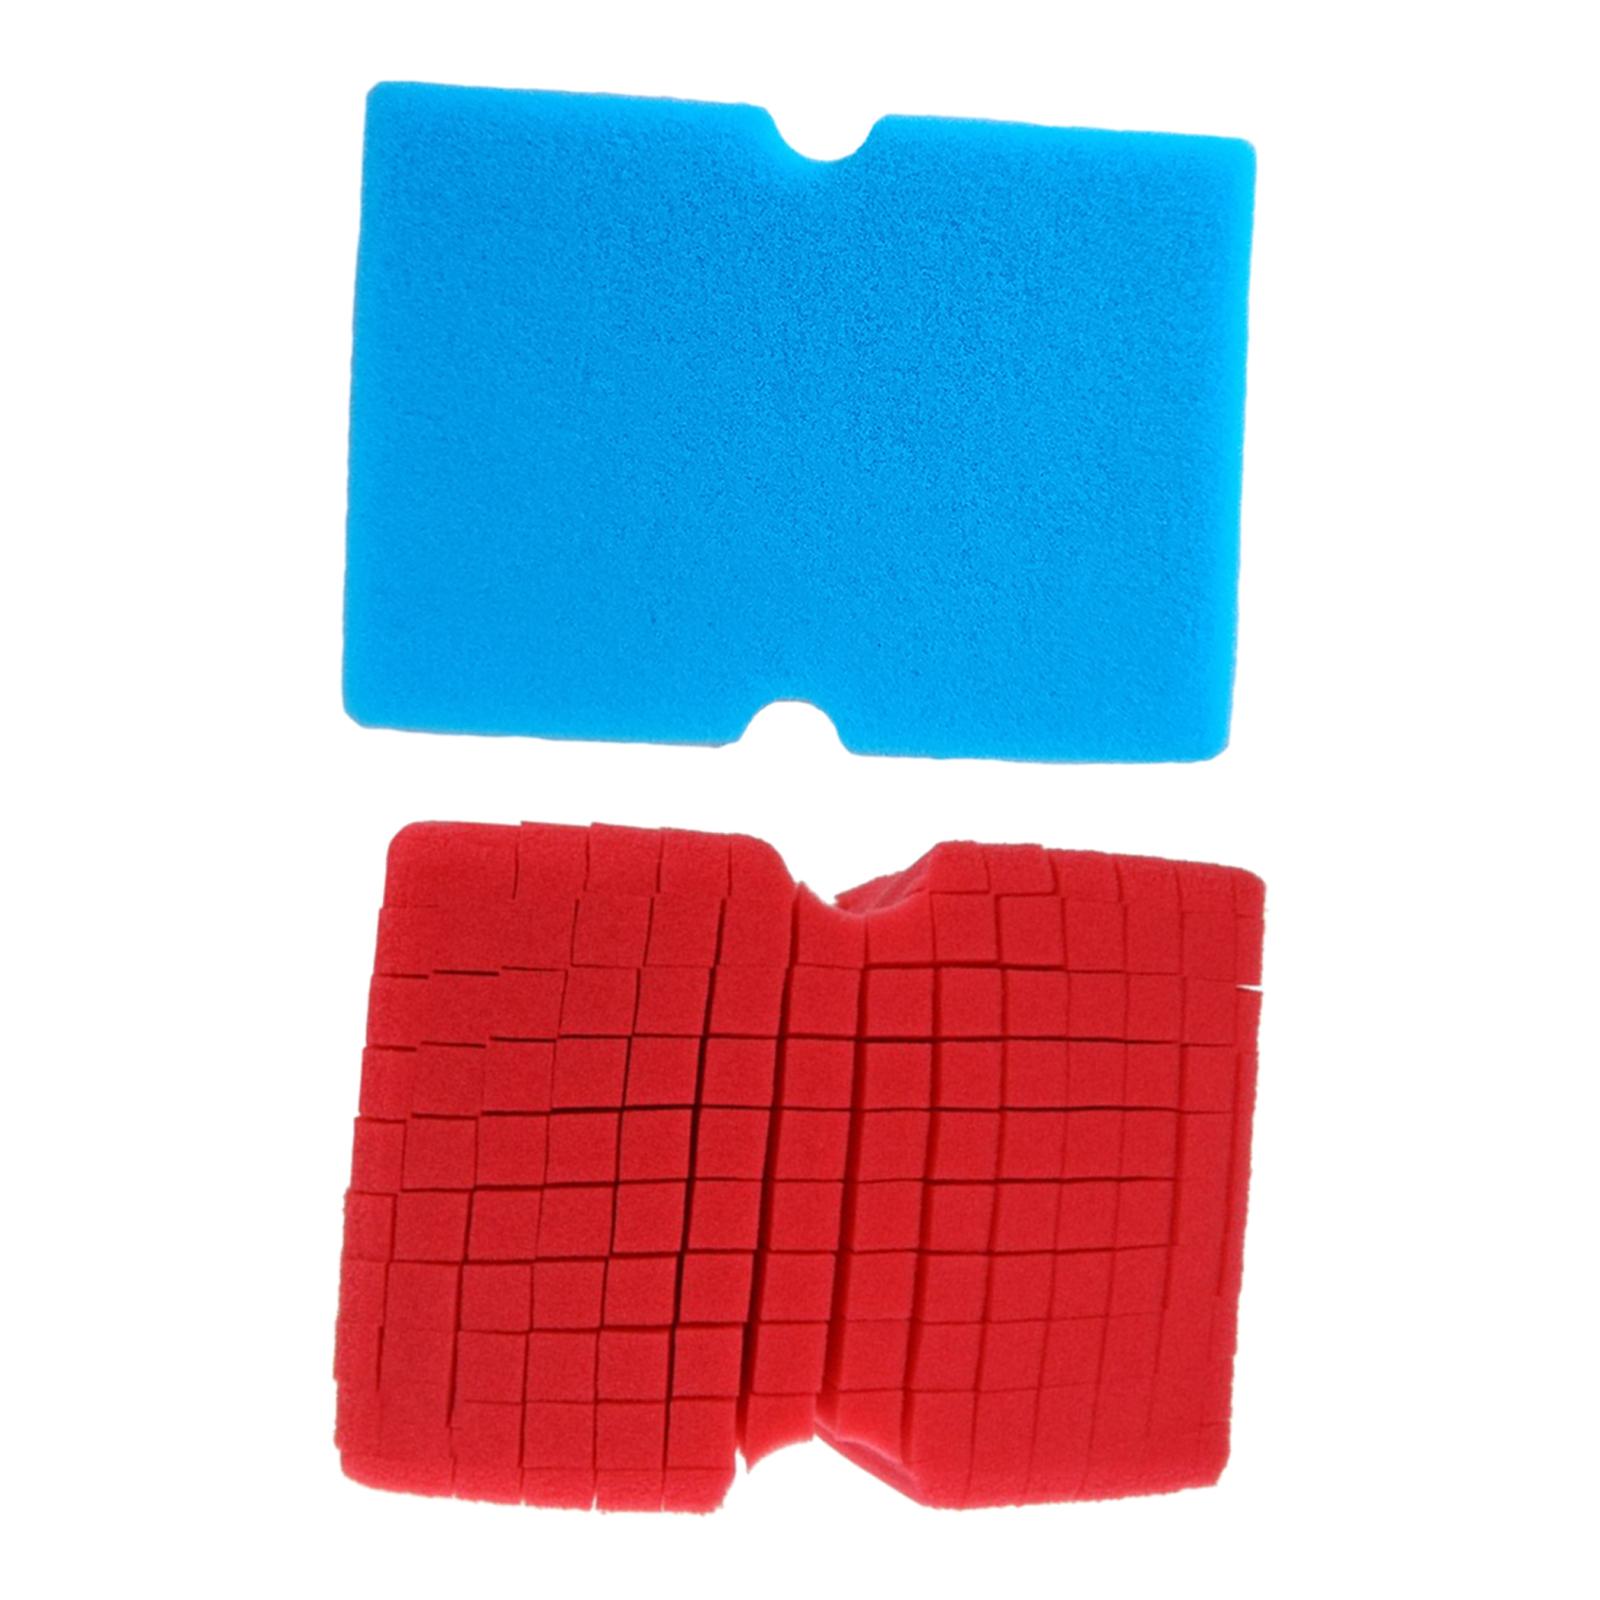 Damp Clean Duster Sponge Household Cleaning Sponge for Motorcycles Cars Red